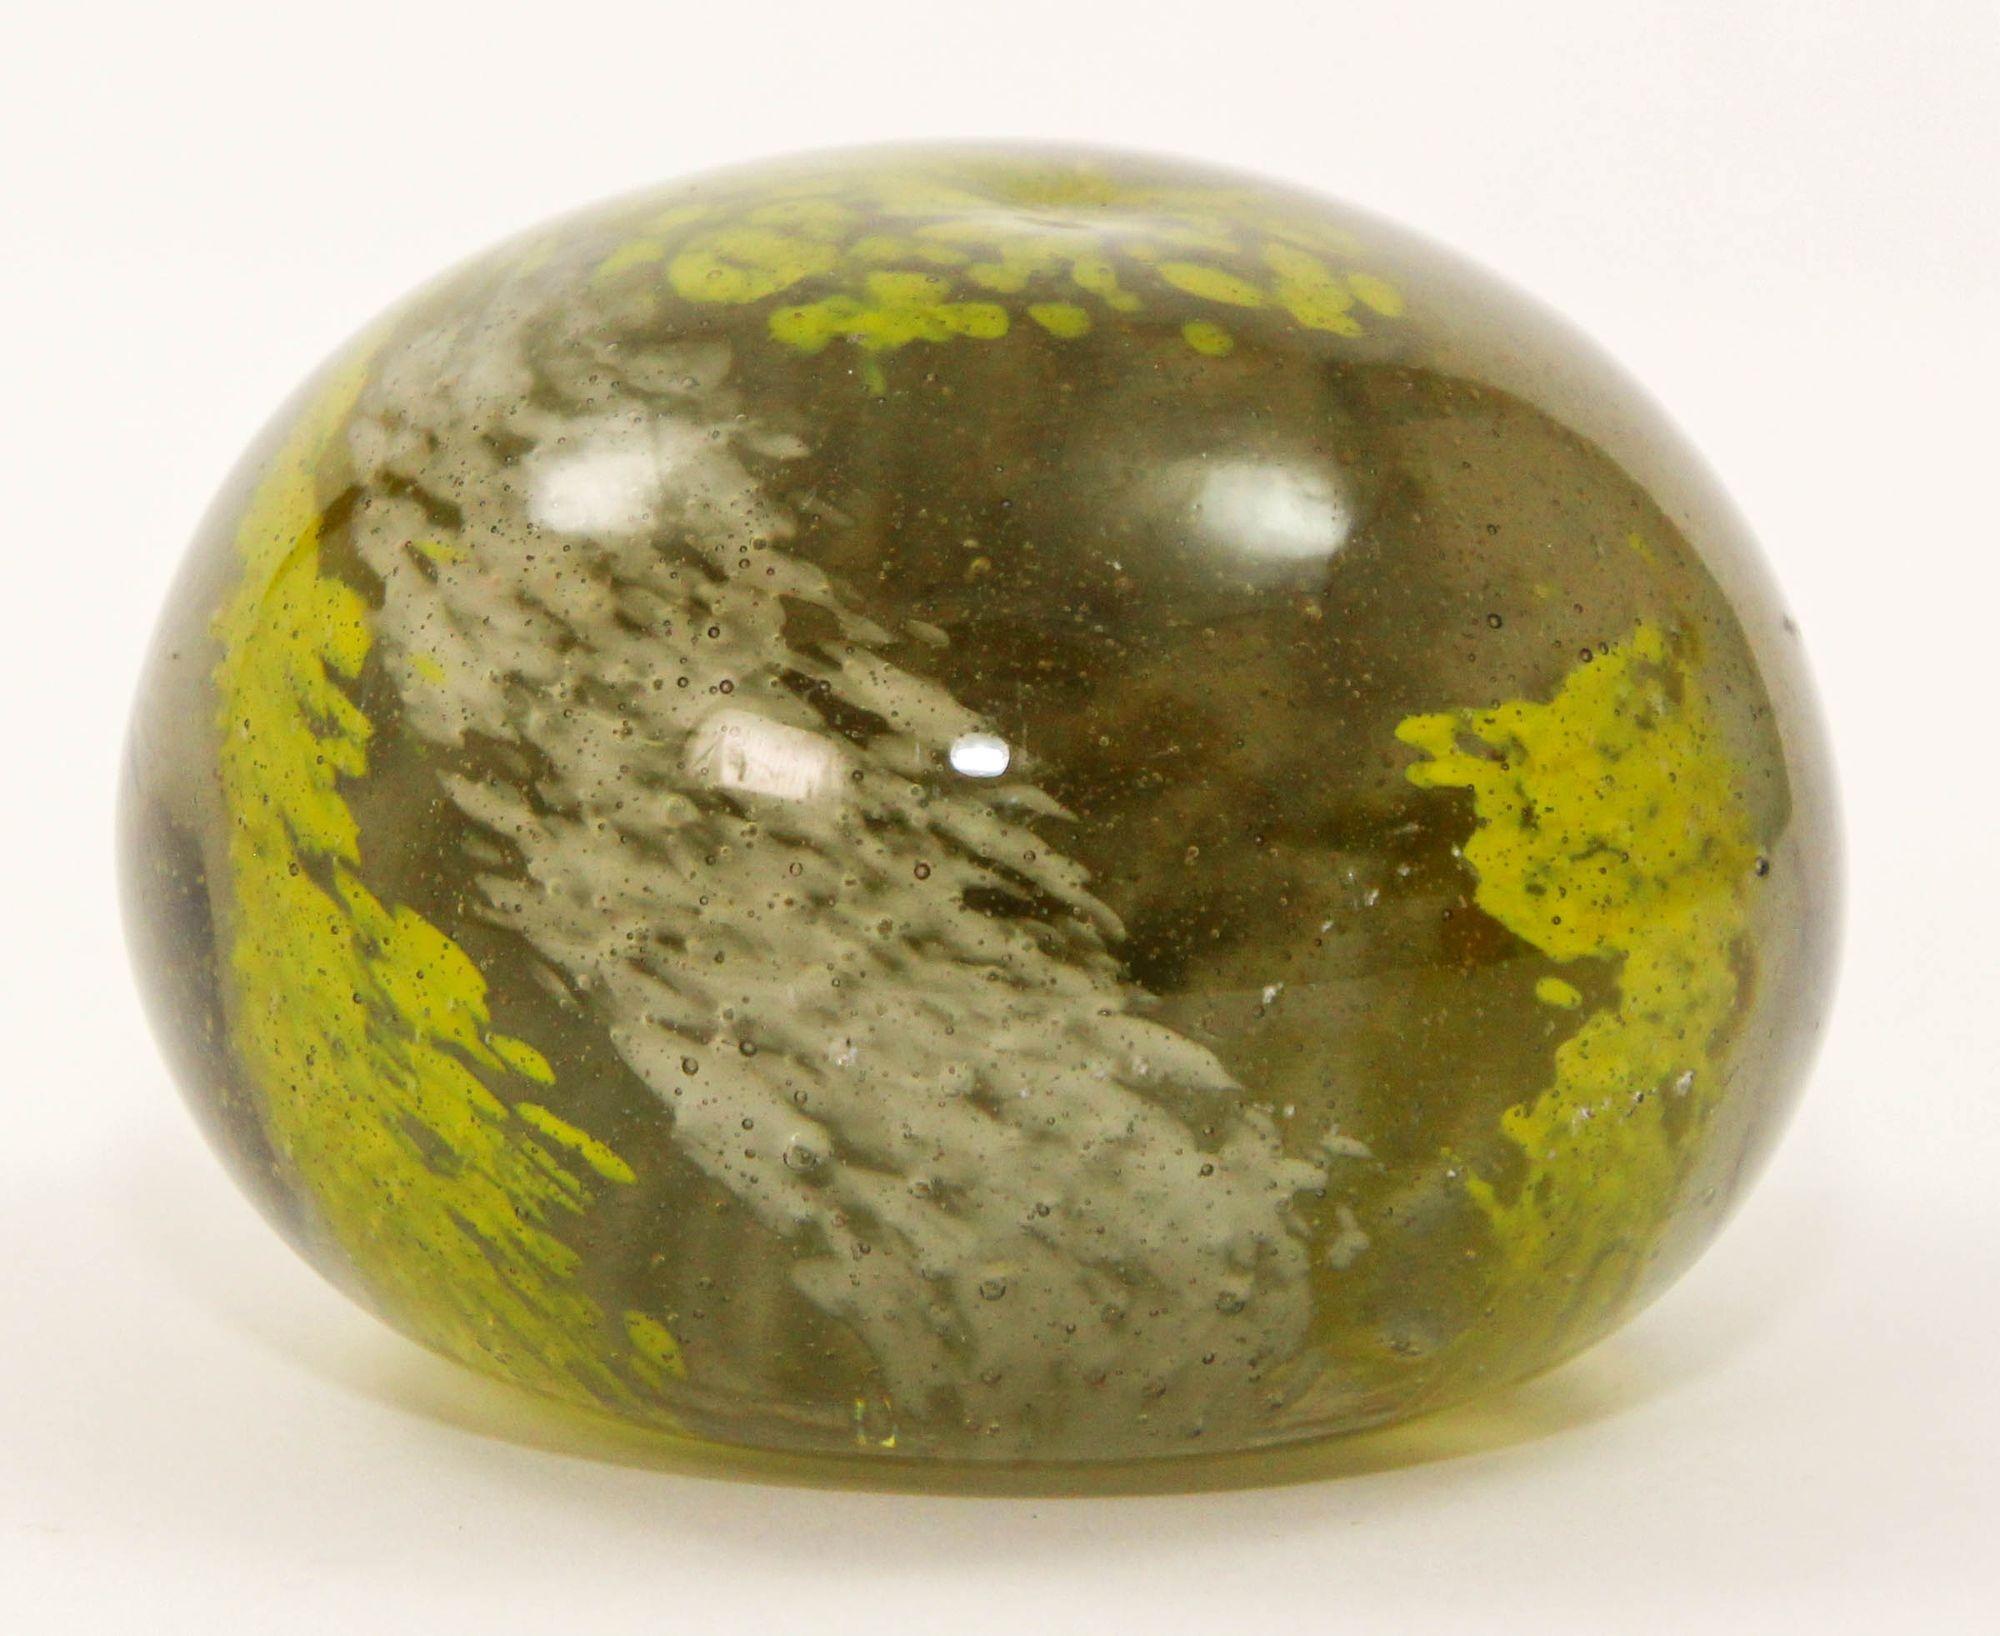 Vintage Kerry Art Glass Paperweight Hand Blown in Olive Green and Yellow Colors For Sale 1